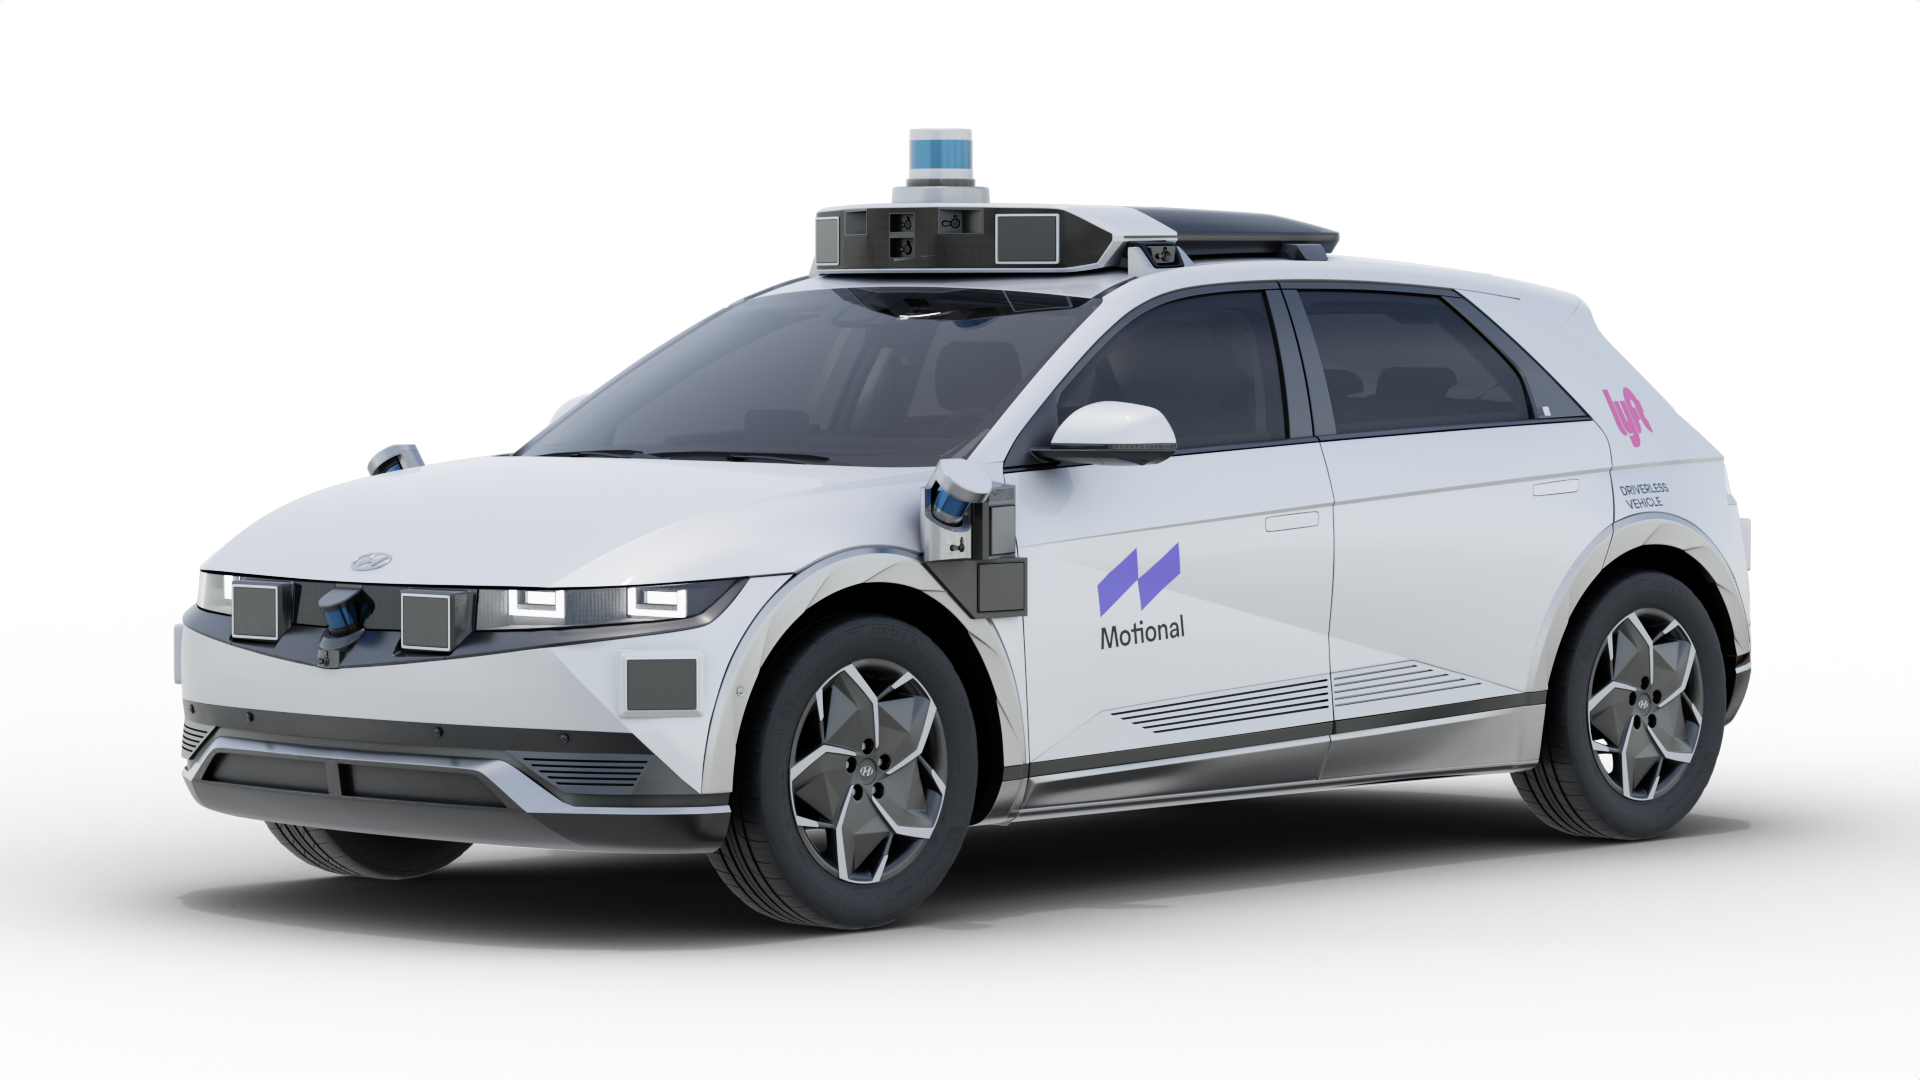 The Motional IONIQ 5 robotaxi in white